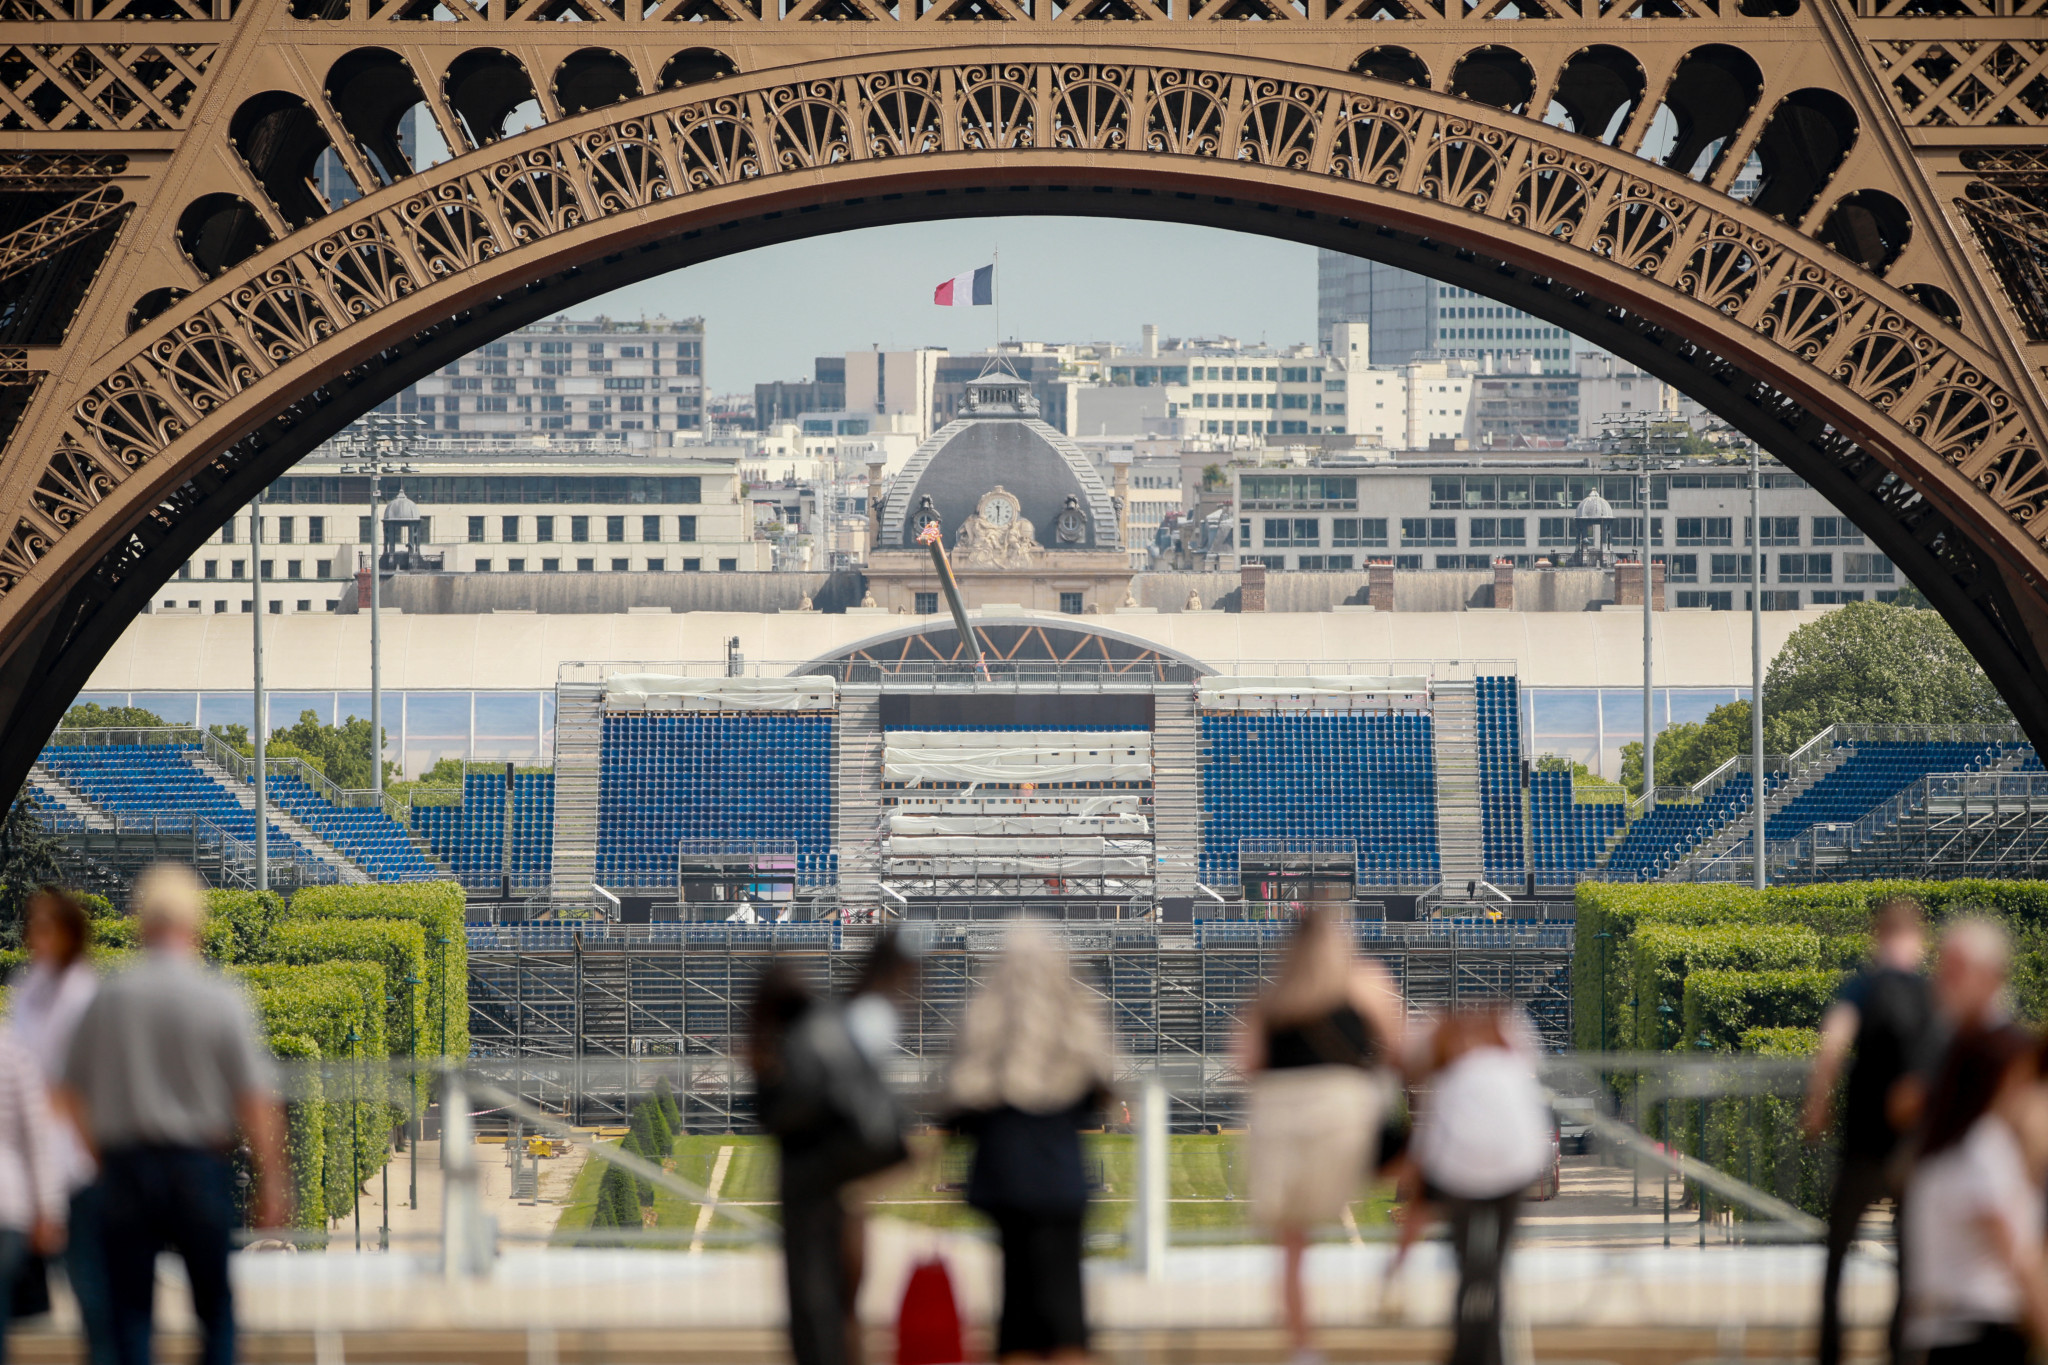 The Eiffel Tower will play host to the Olympics volleyball tournament. GETTY IMAGES